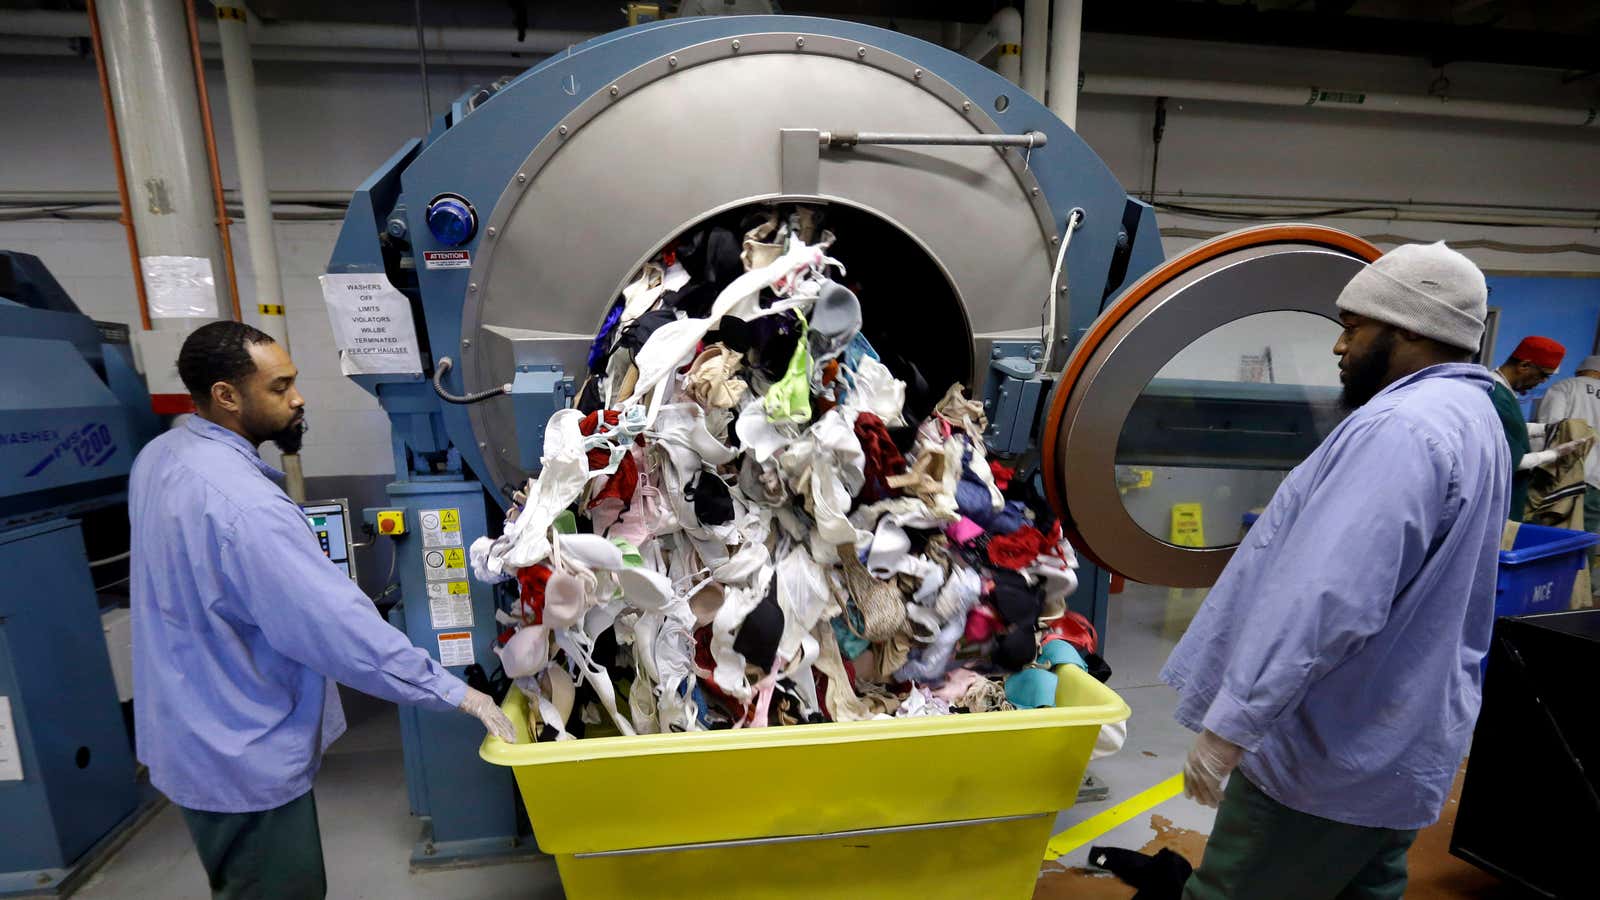 The US wants to take down a bigger laundry operation than this one